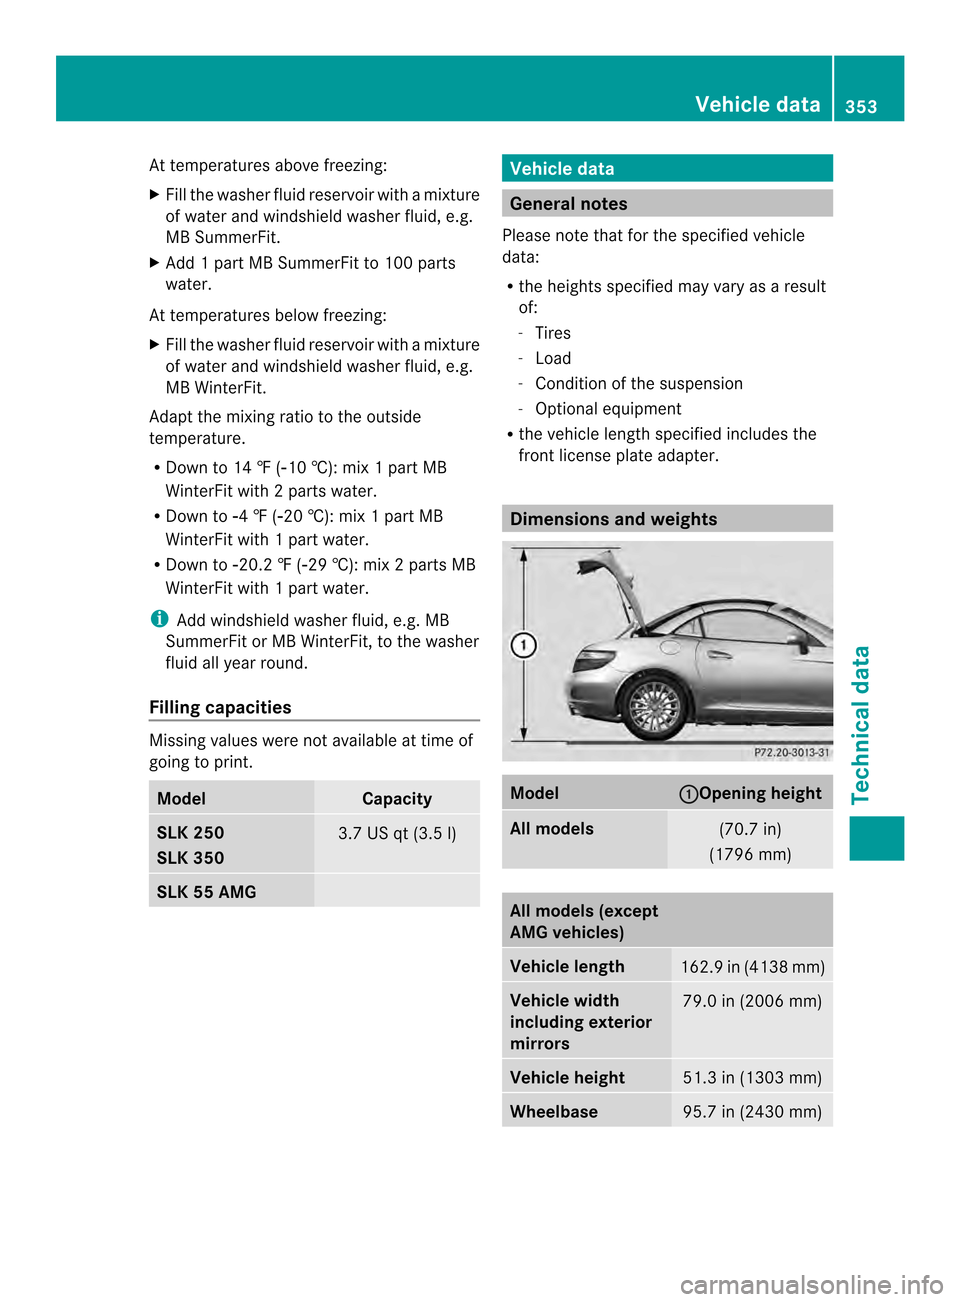 MERCEDES-BENZ SLK-Class 2013 R172 Owners Manual At temperatures above freezing:
X
Fill the washe rfluid reservoir with a mixture
of water and windshield washer fluid, e.g.
MB SummerFit.
X Add 1 part MB SummerFit to 100 parts
water.
At temperatures 